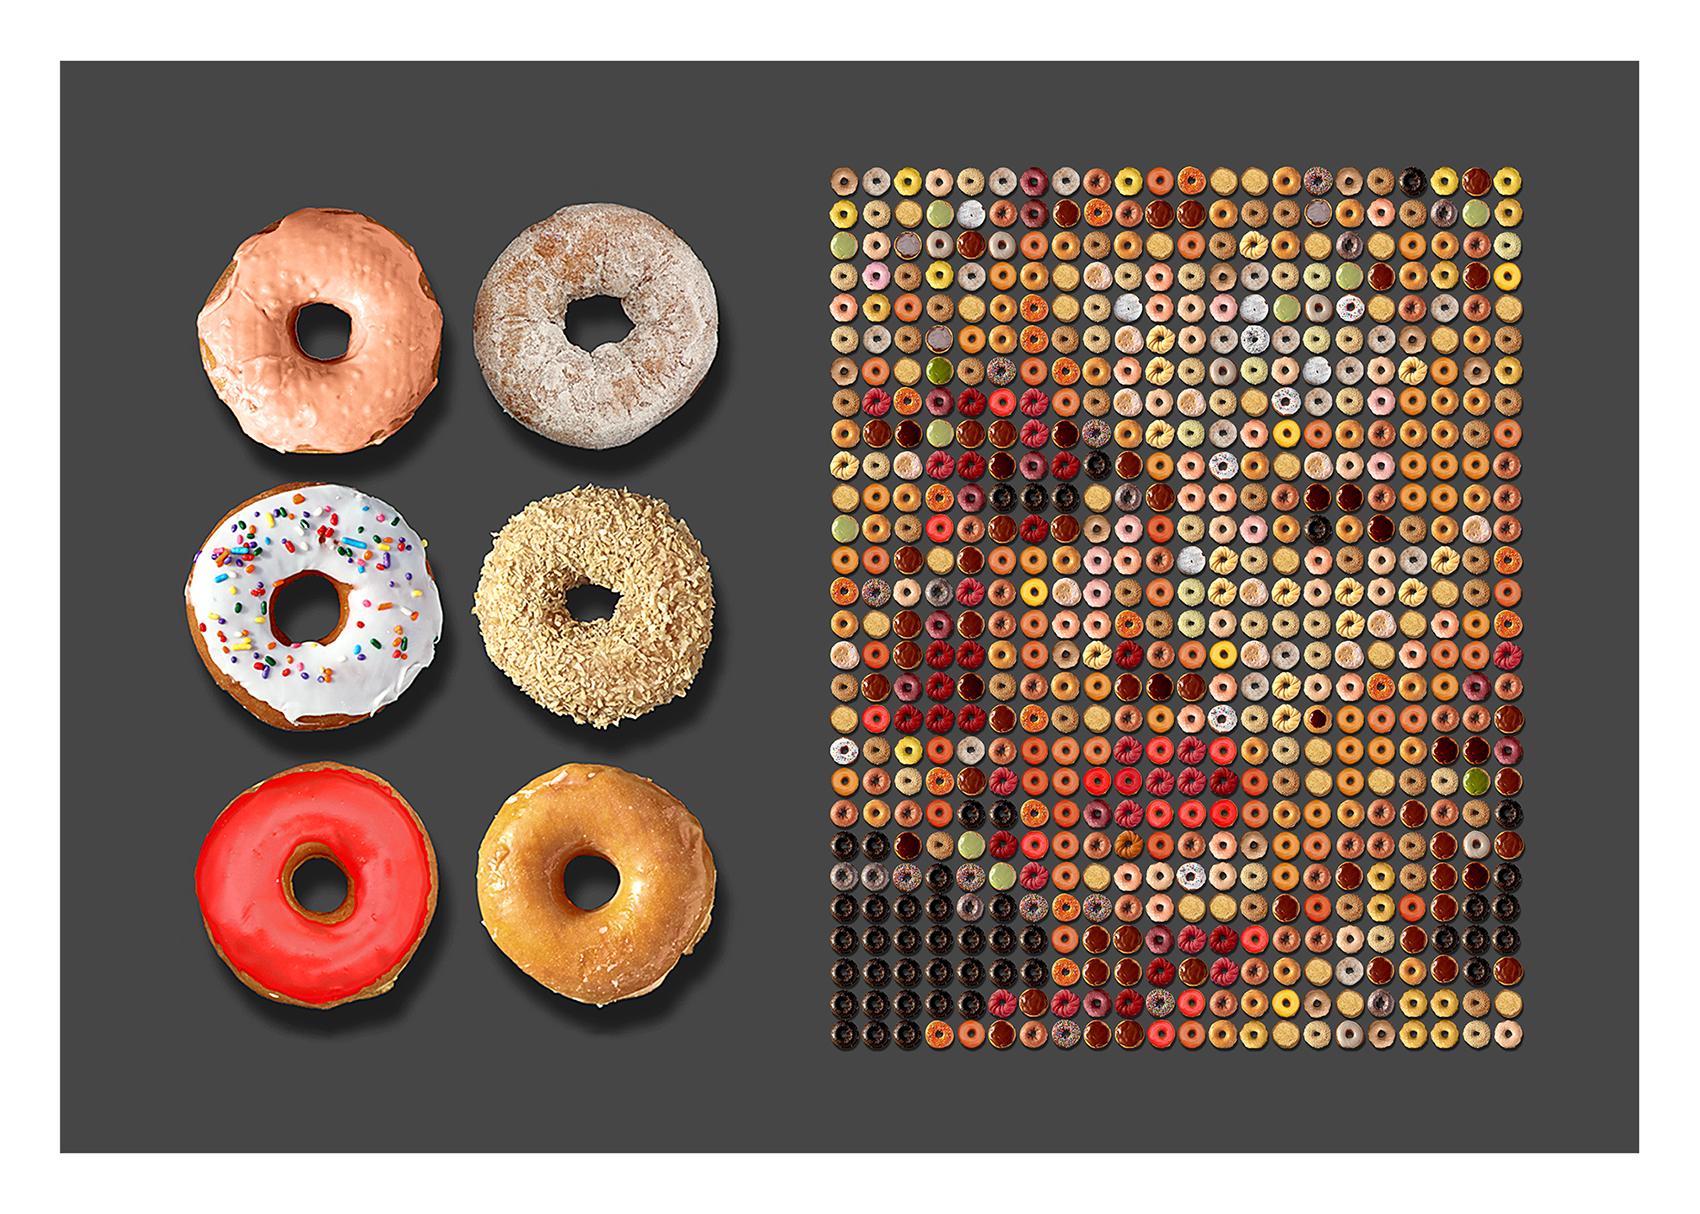 You have read about the extraordinary donut portraits by Candice CMC on social media world-wide and we are excited and proud to represent her work.

Now, for the first time, we are pleased to offer a work of art by Candice CMC at this special price.